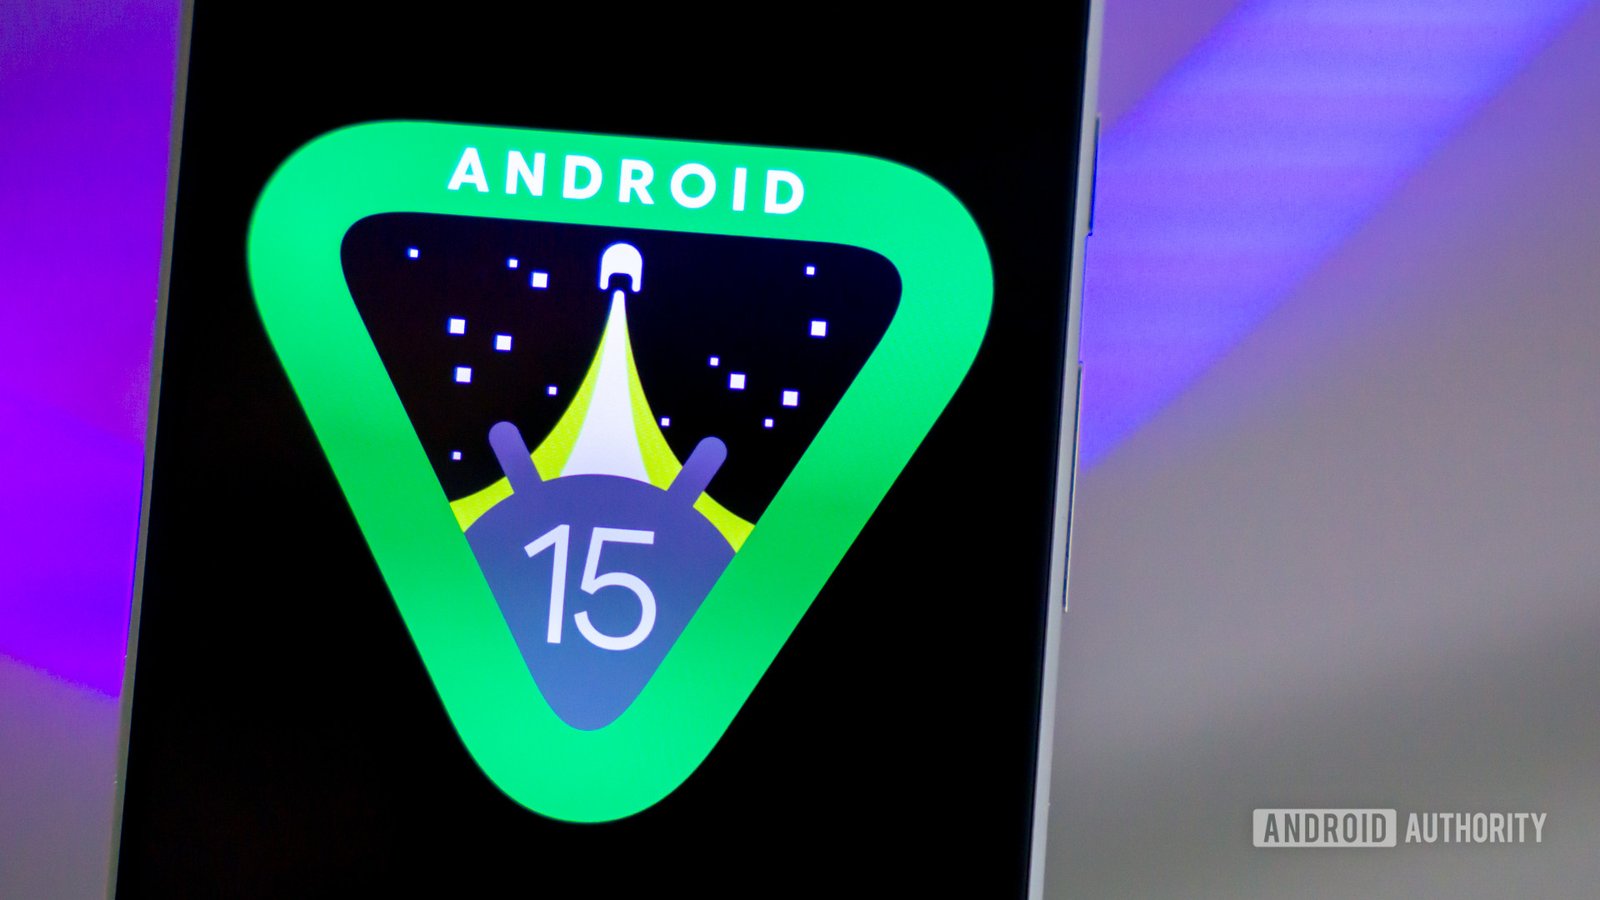 Here’s how Android 15 will protect you against fraud, scams, and screen sharing attacks